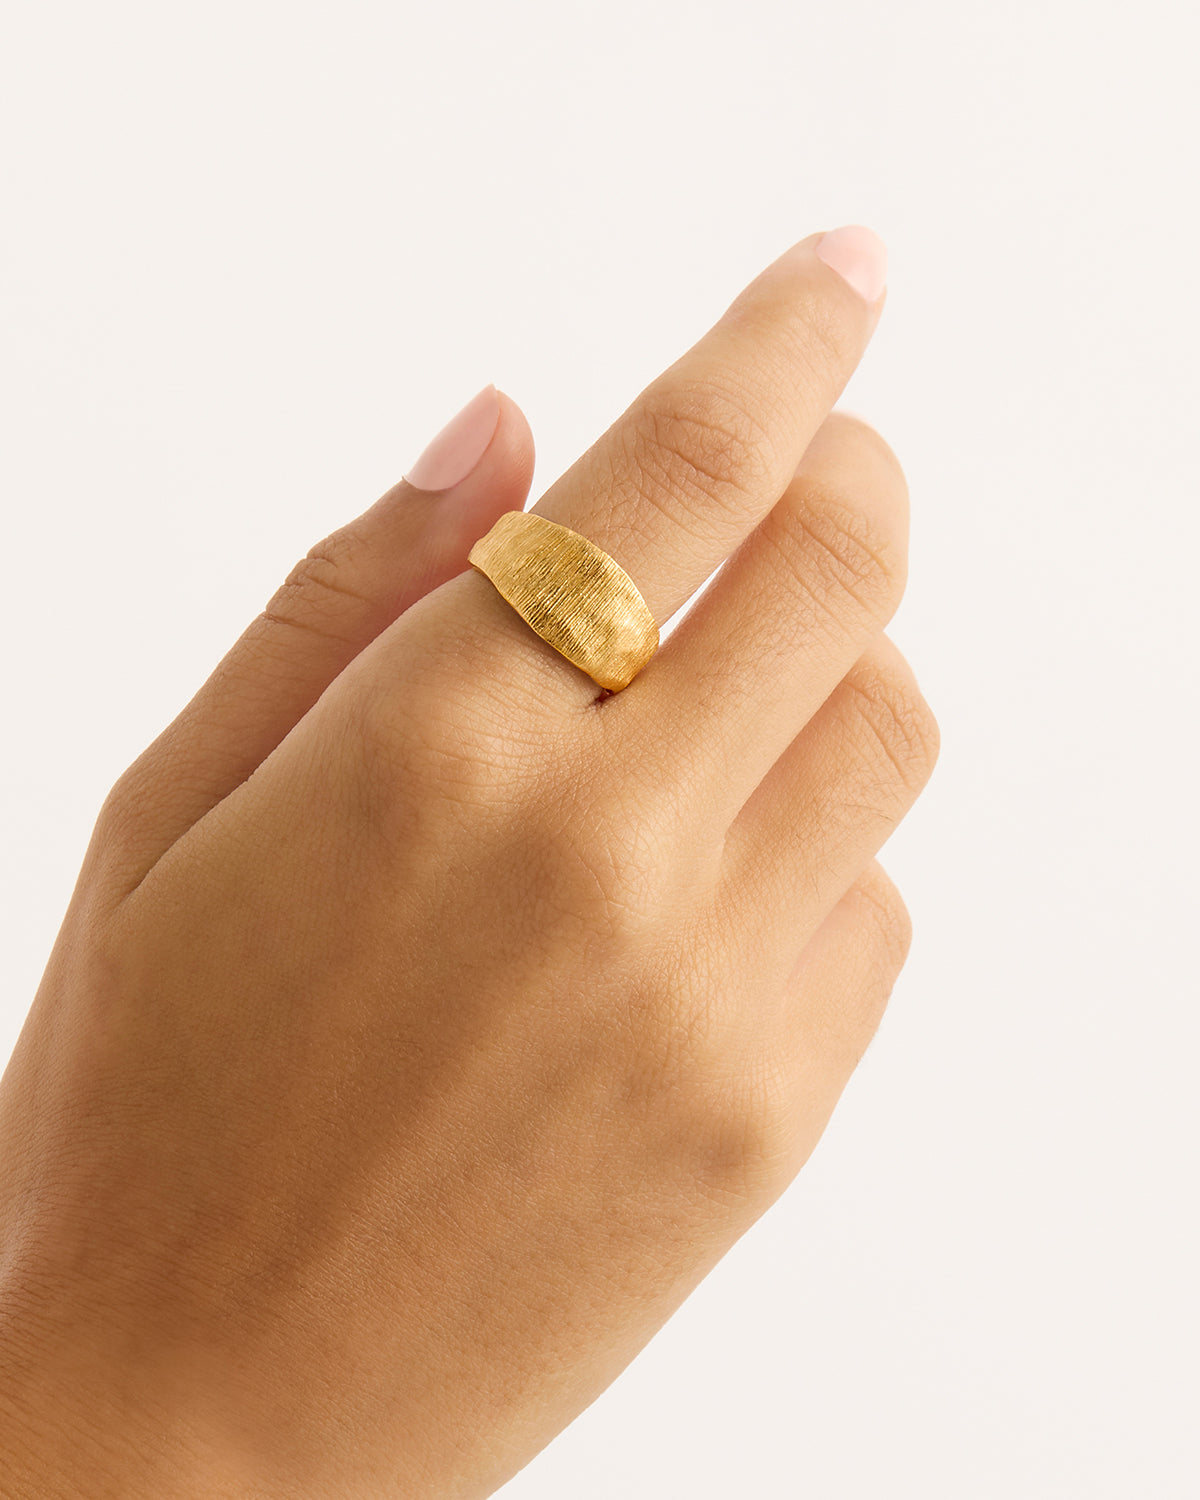 By Charlotte Woven Light Ring, Gold